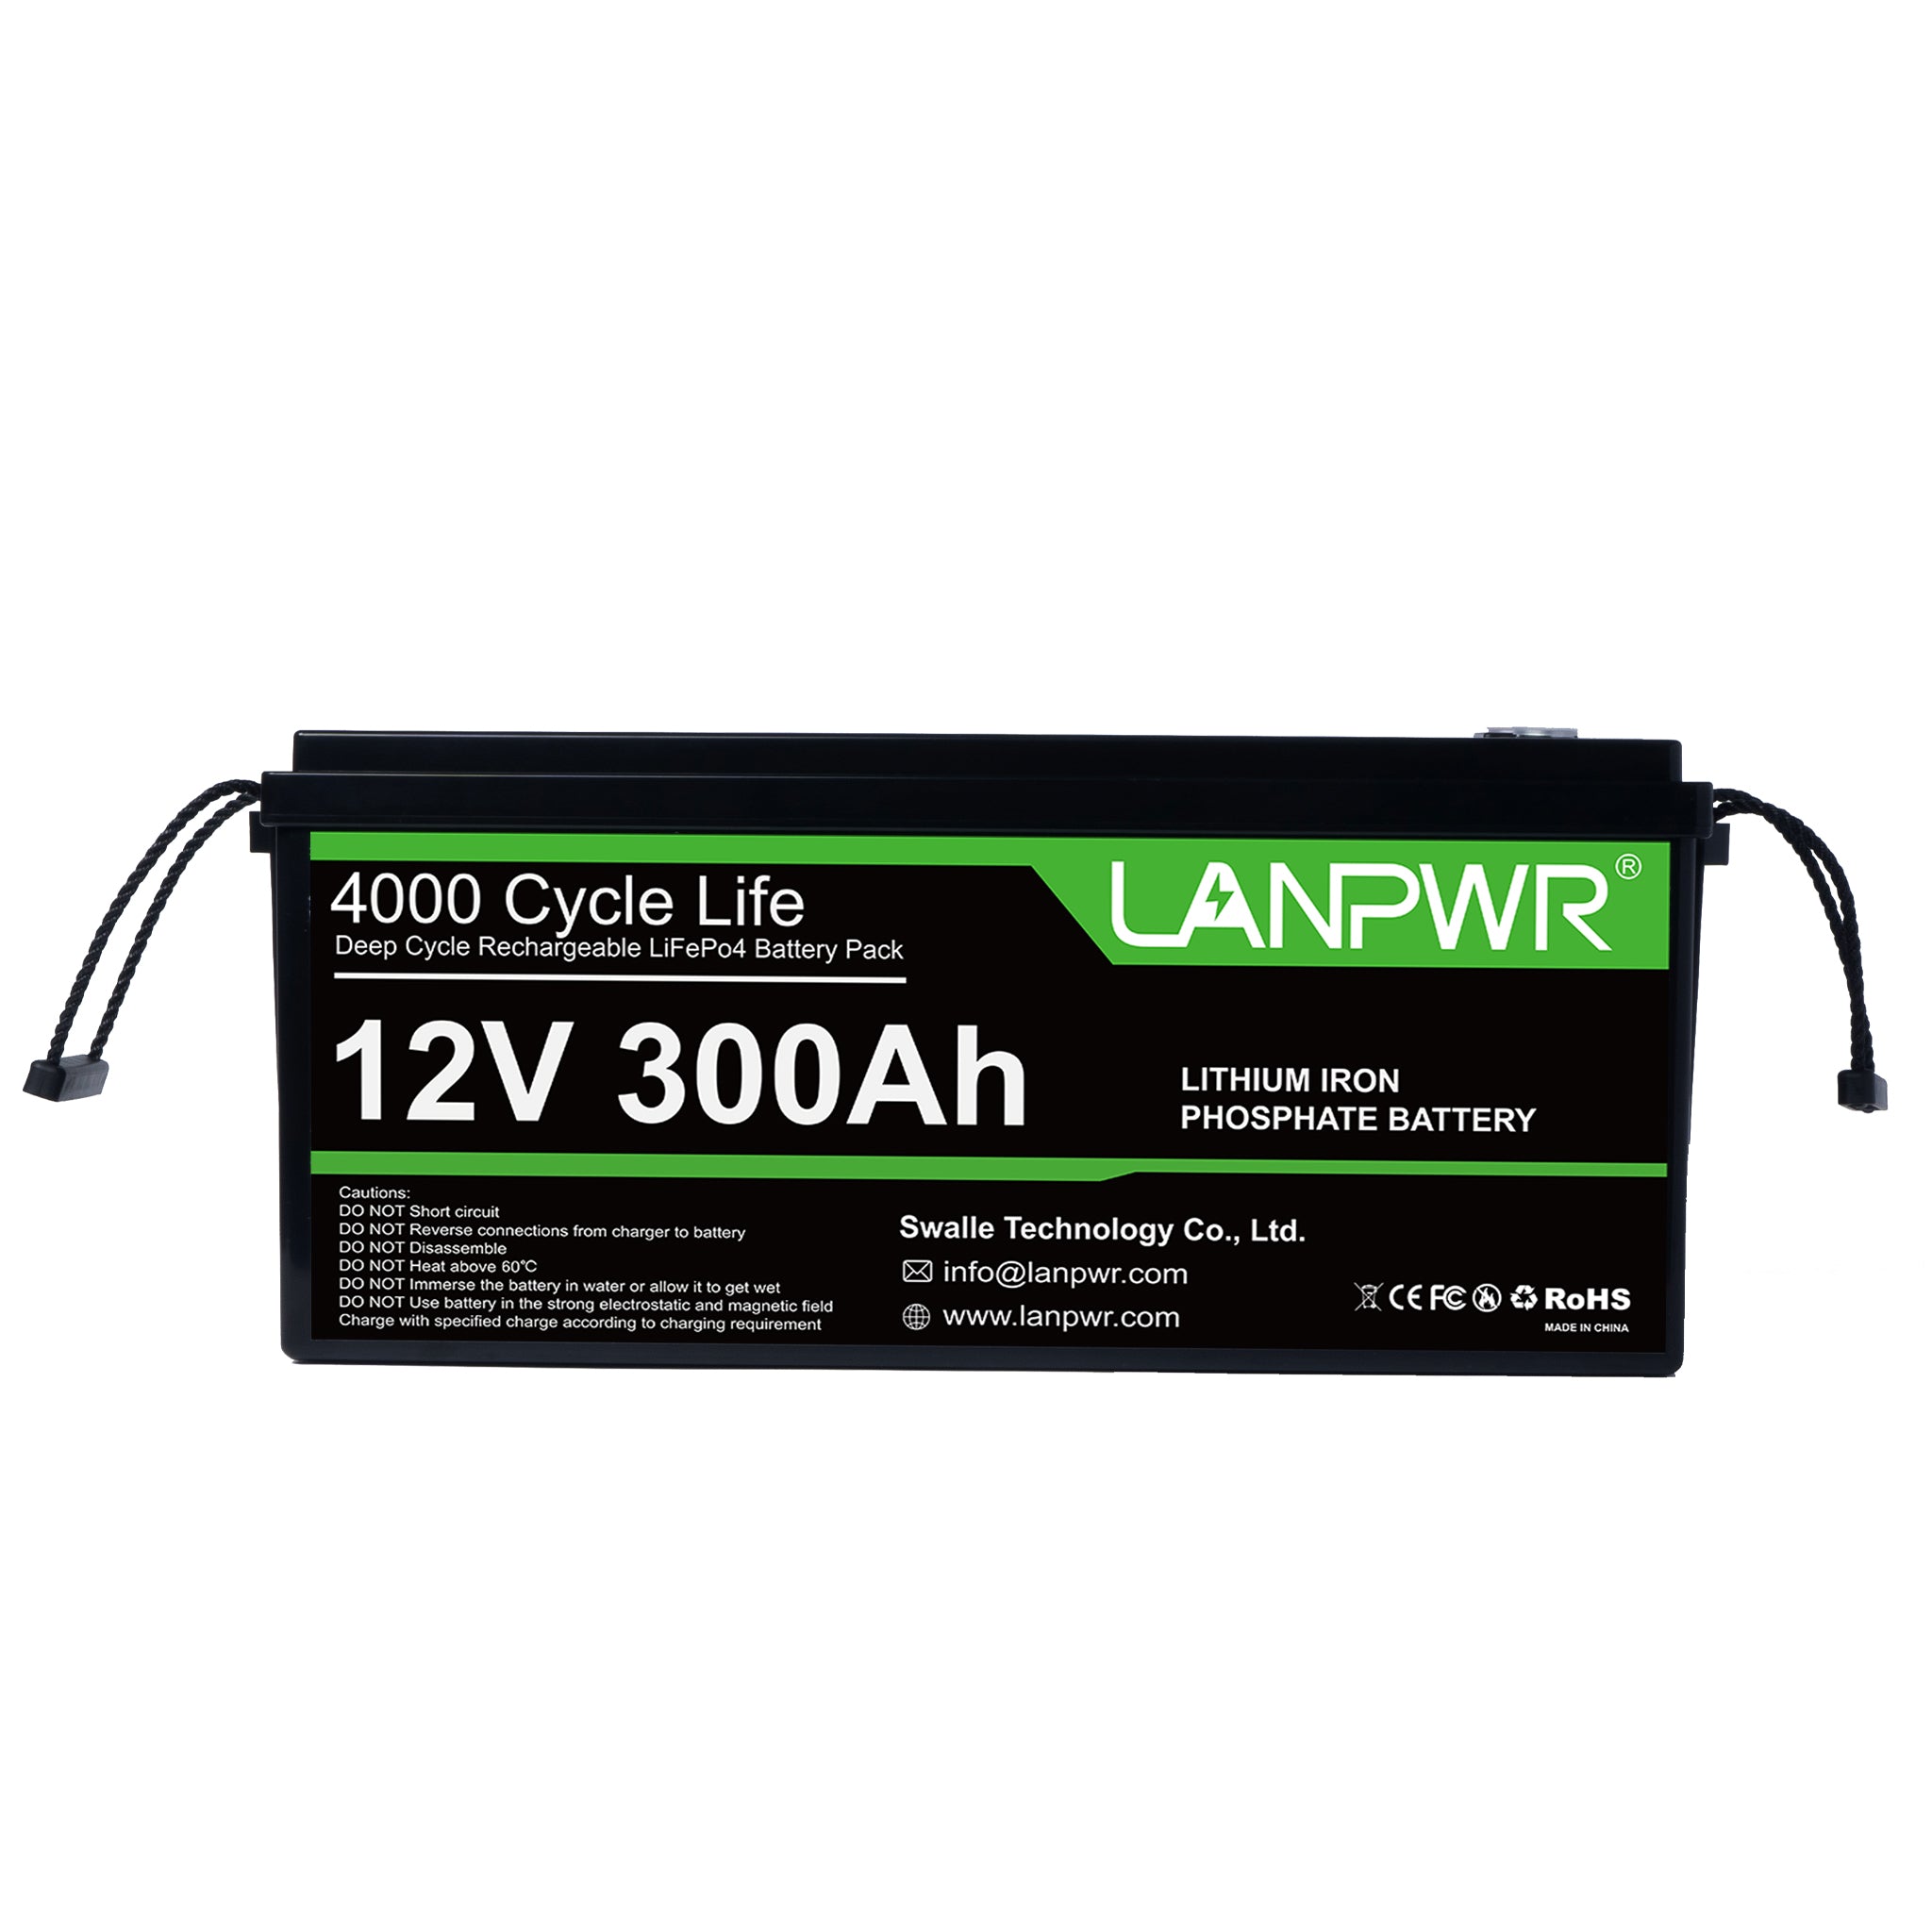 LANPWR 12V 300Ah LiFePO4 Battery, Build-In 200A BMS Maximum Load Power 2560W, 3840Wh Energy